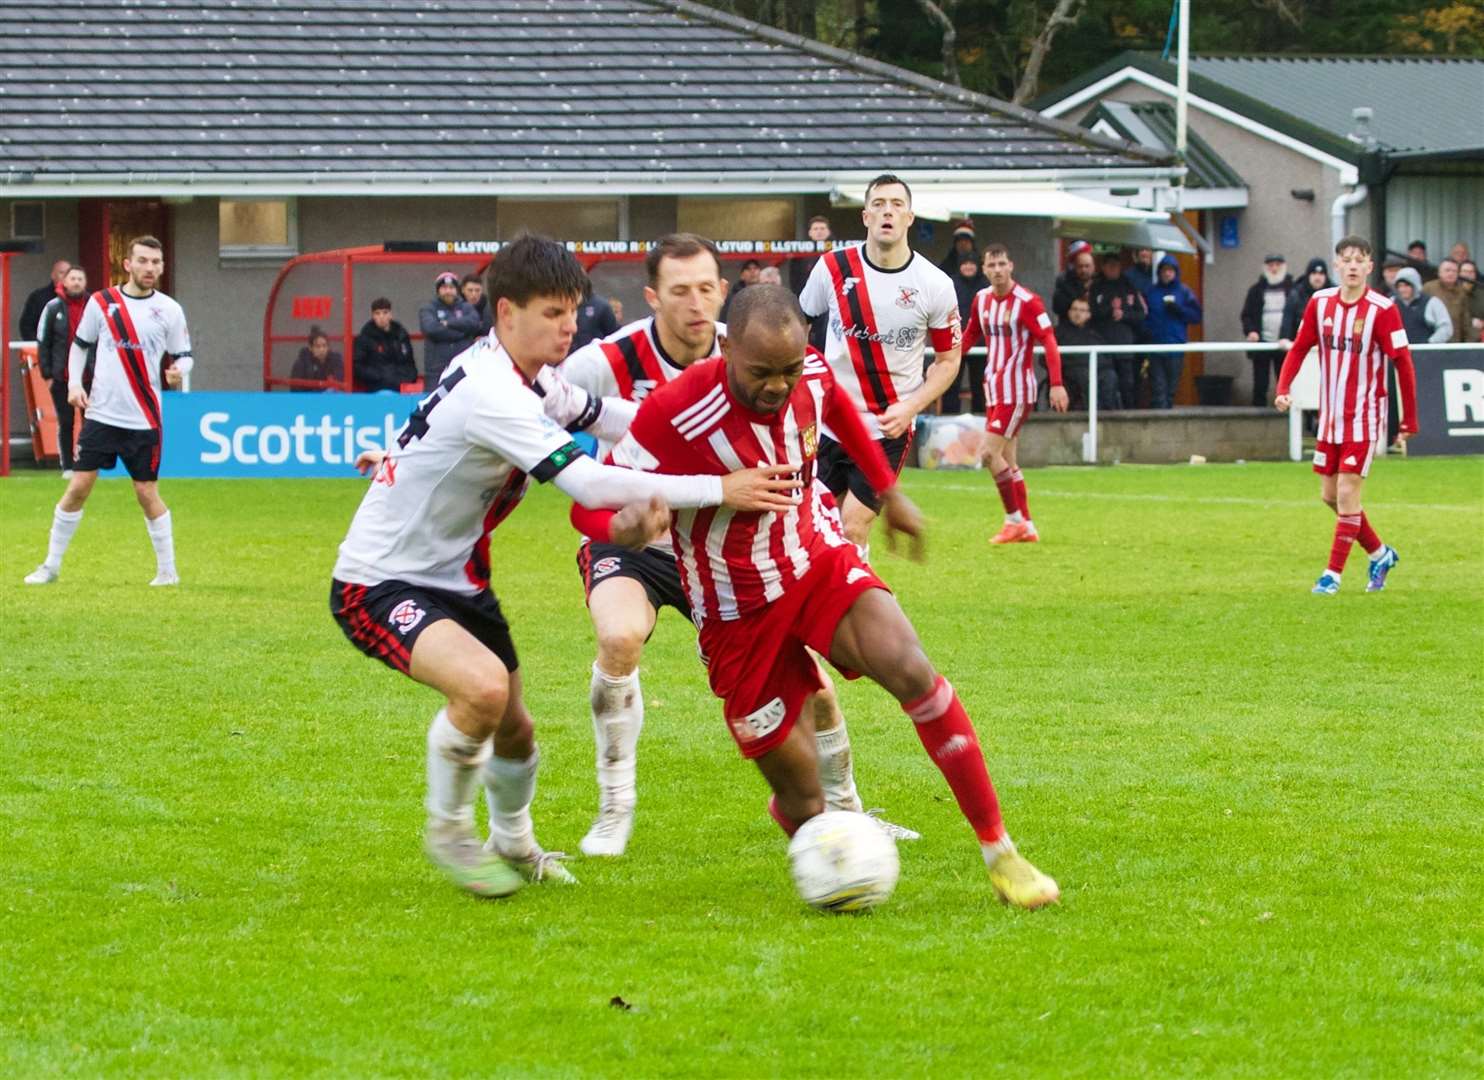 Formartine's Julian Wade slips past the Clydebank defenders. Picture: Phil Harman.